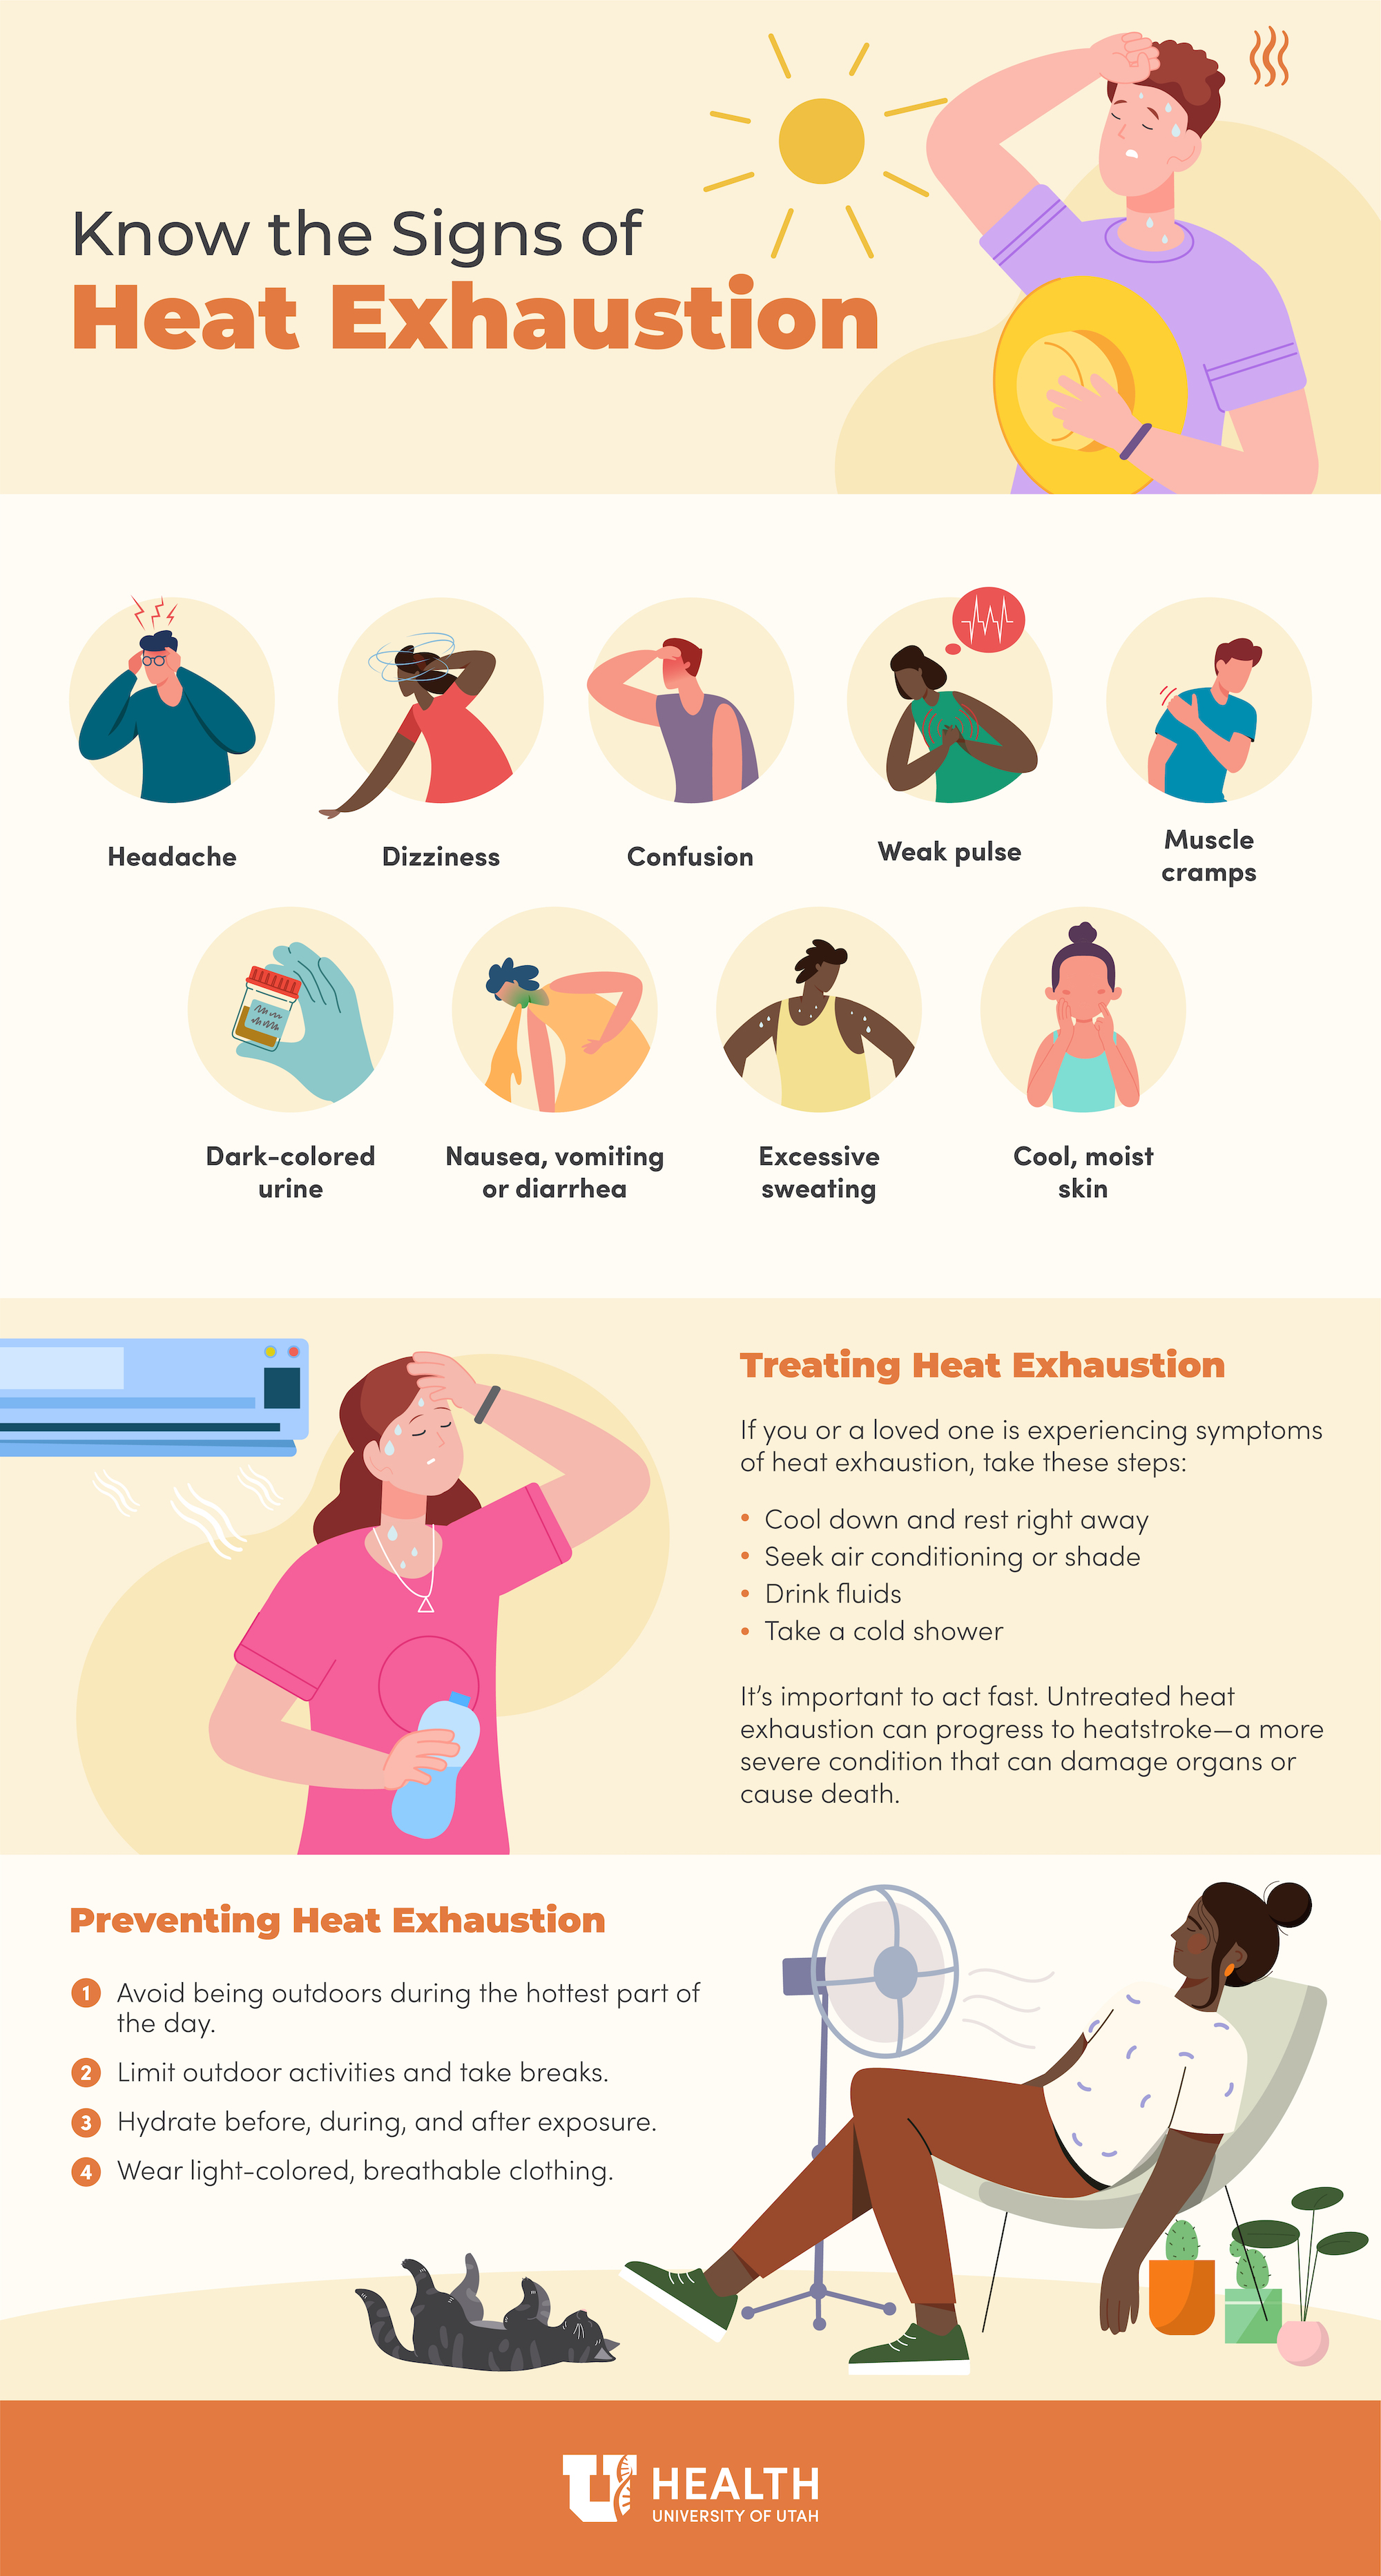 Know the signs of heat exhaustion